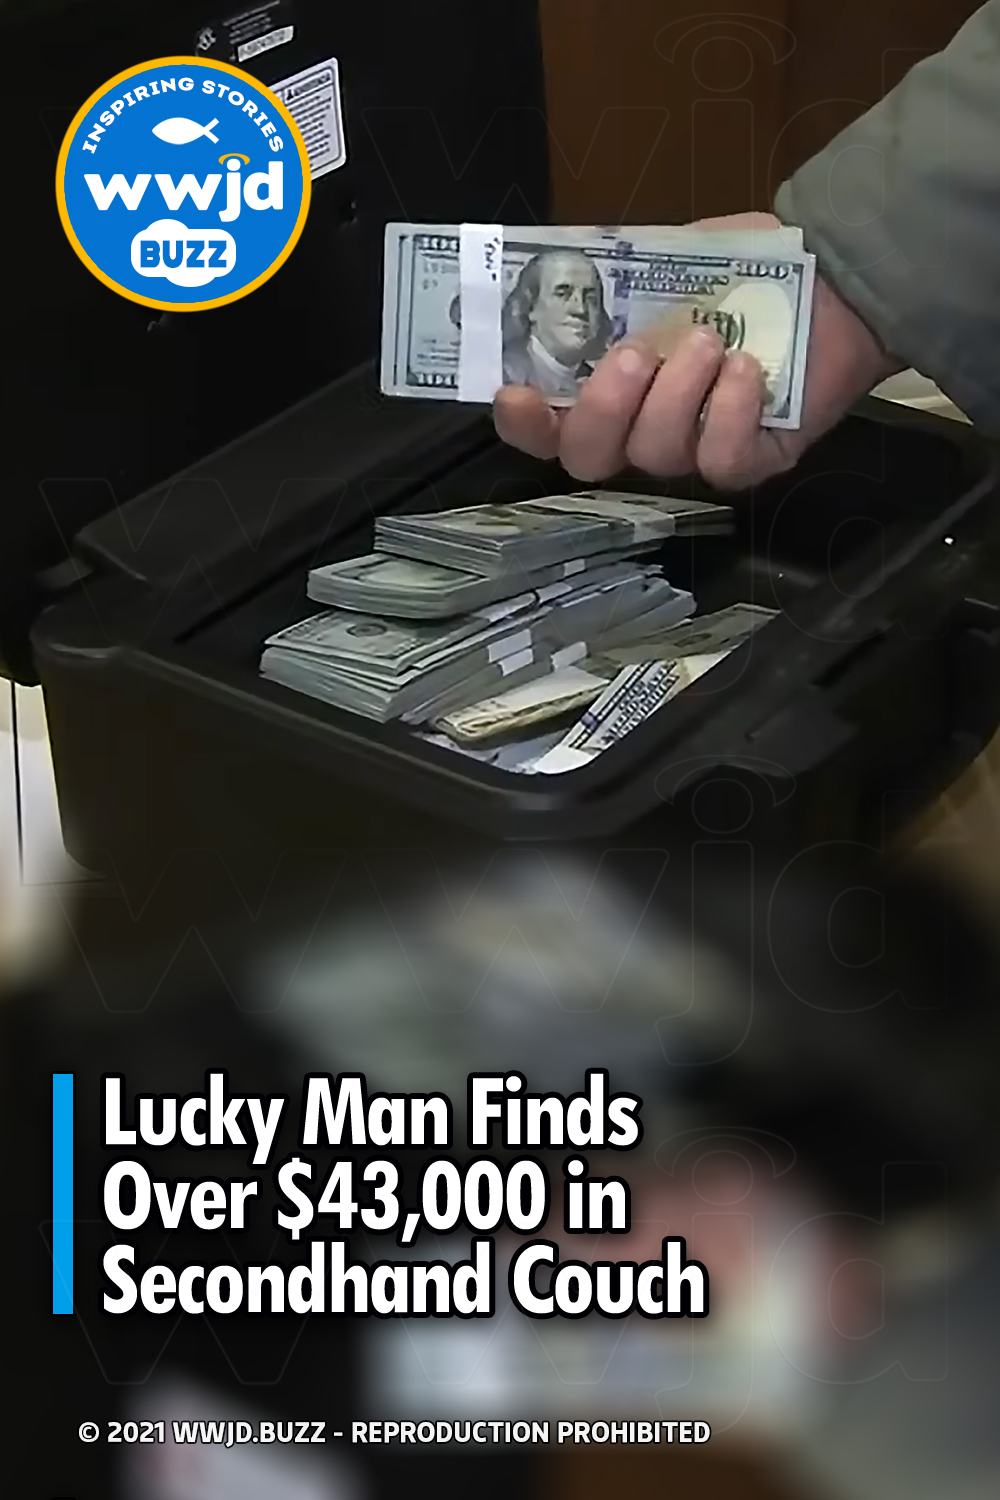 Lucky Man Finds Over $43,000 in Secondhand Couch